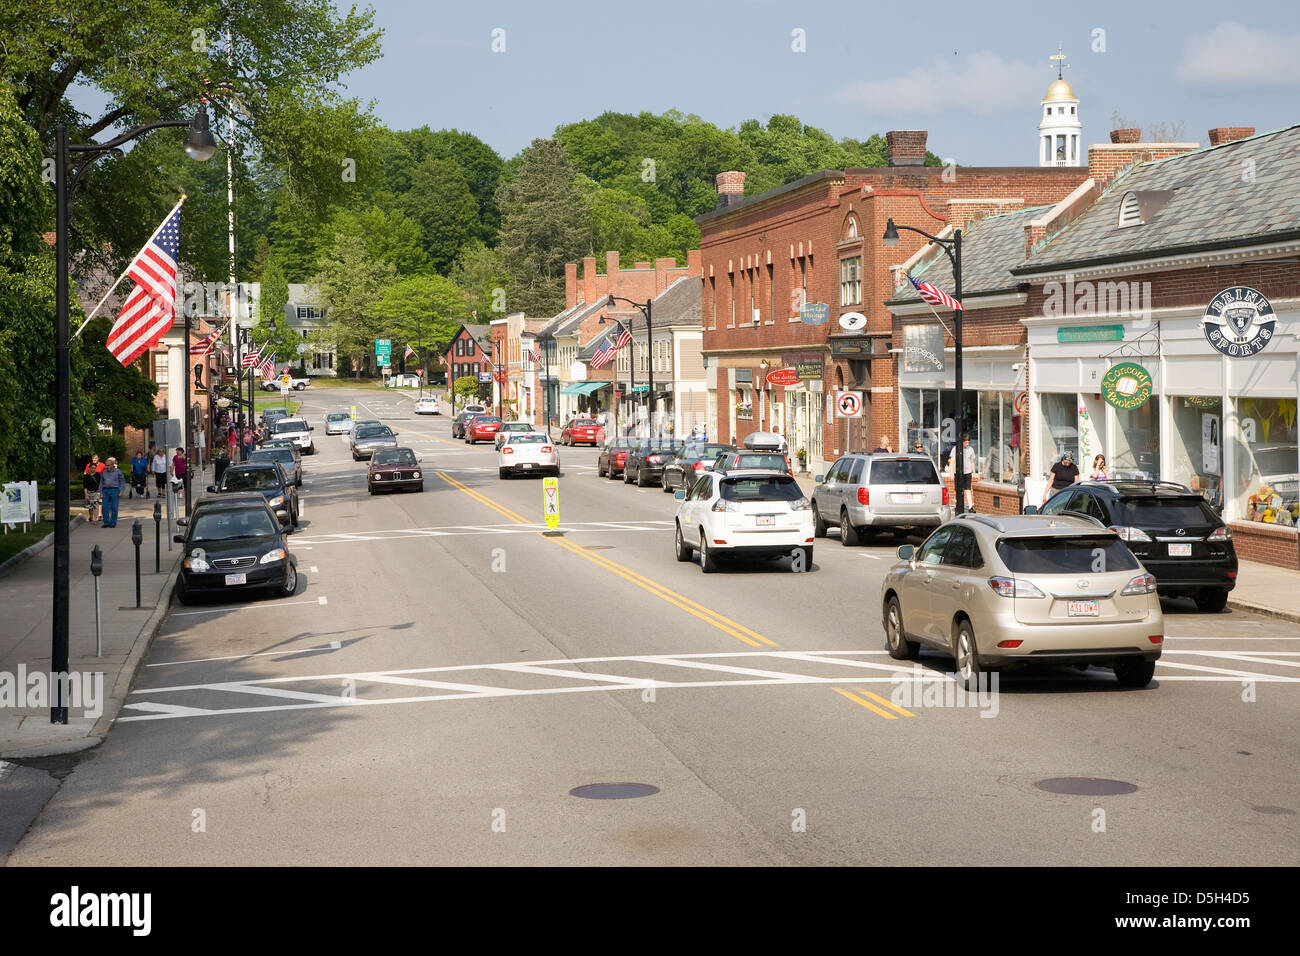 Storefronts in historic Concord, MA on Memorial Day Weekend with American Flags displayed Stock Photo